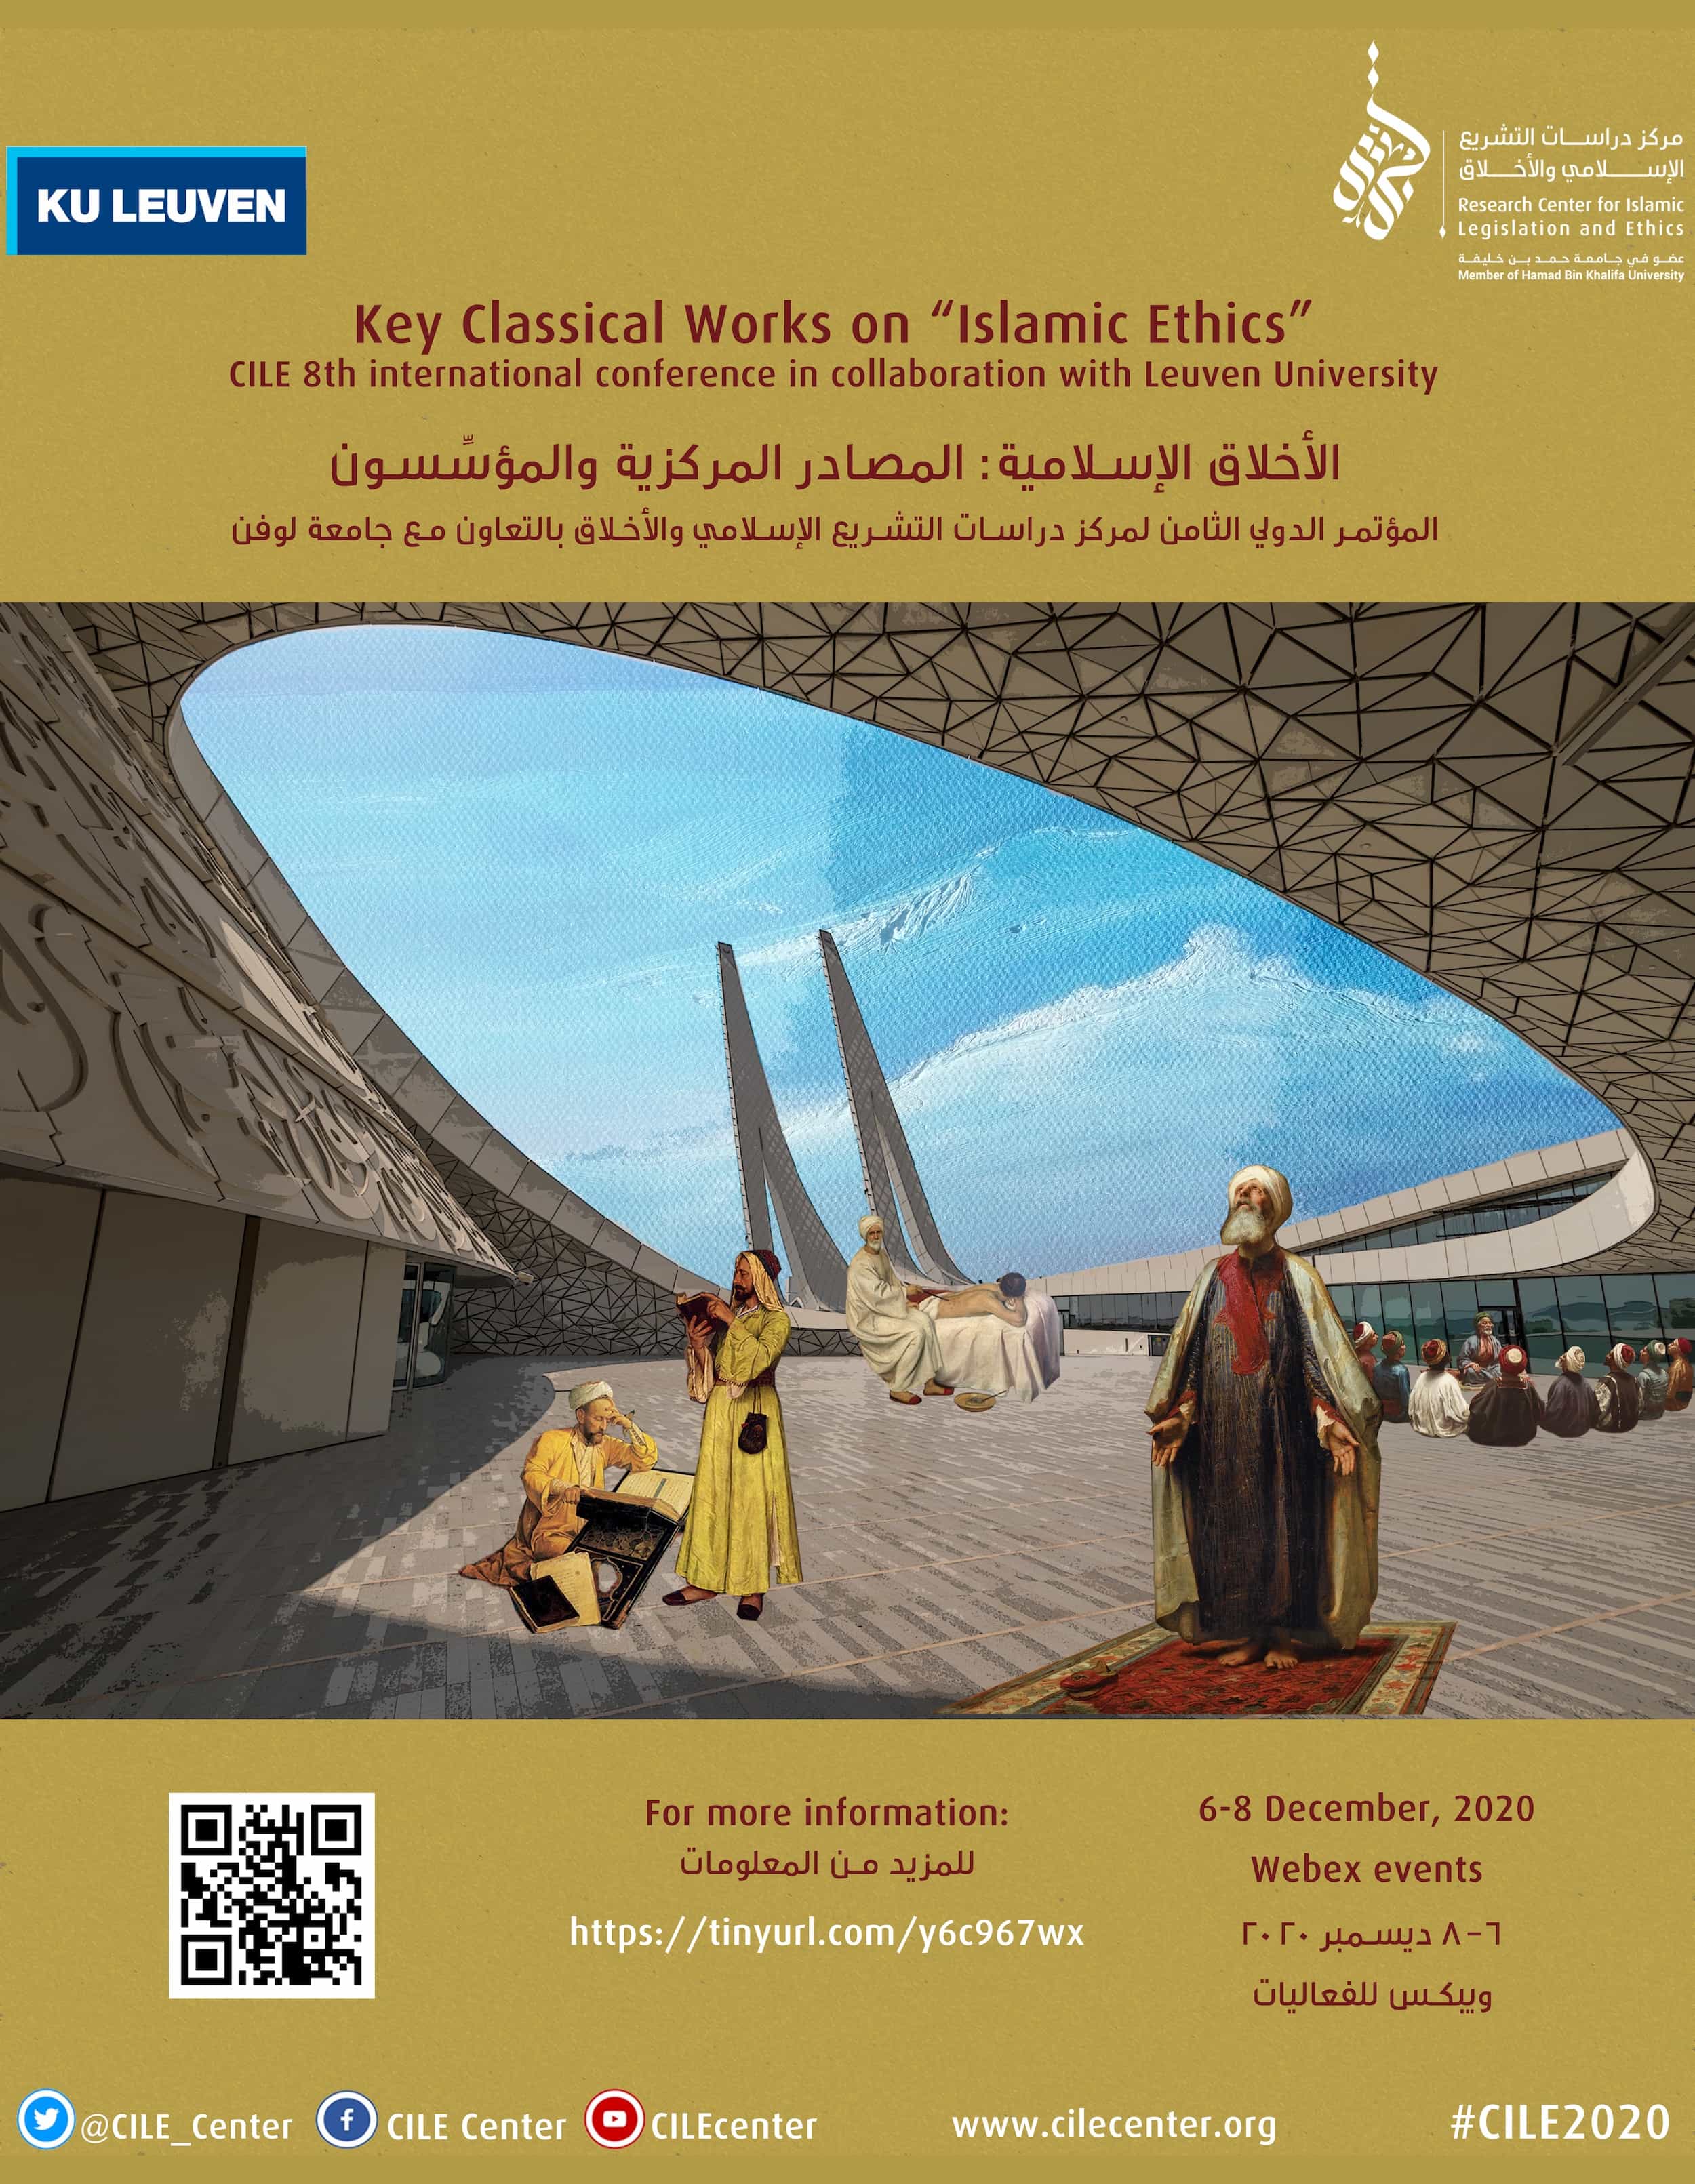 #CILE2020 Key Classical Works on "Islamic Ethics"